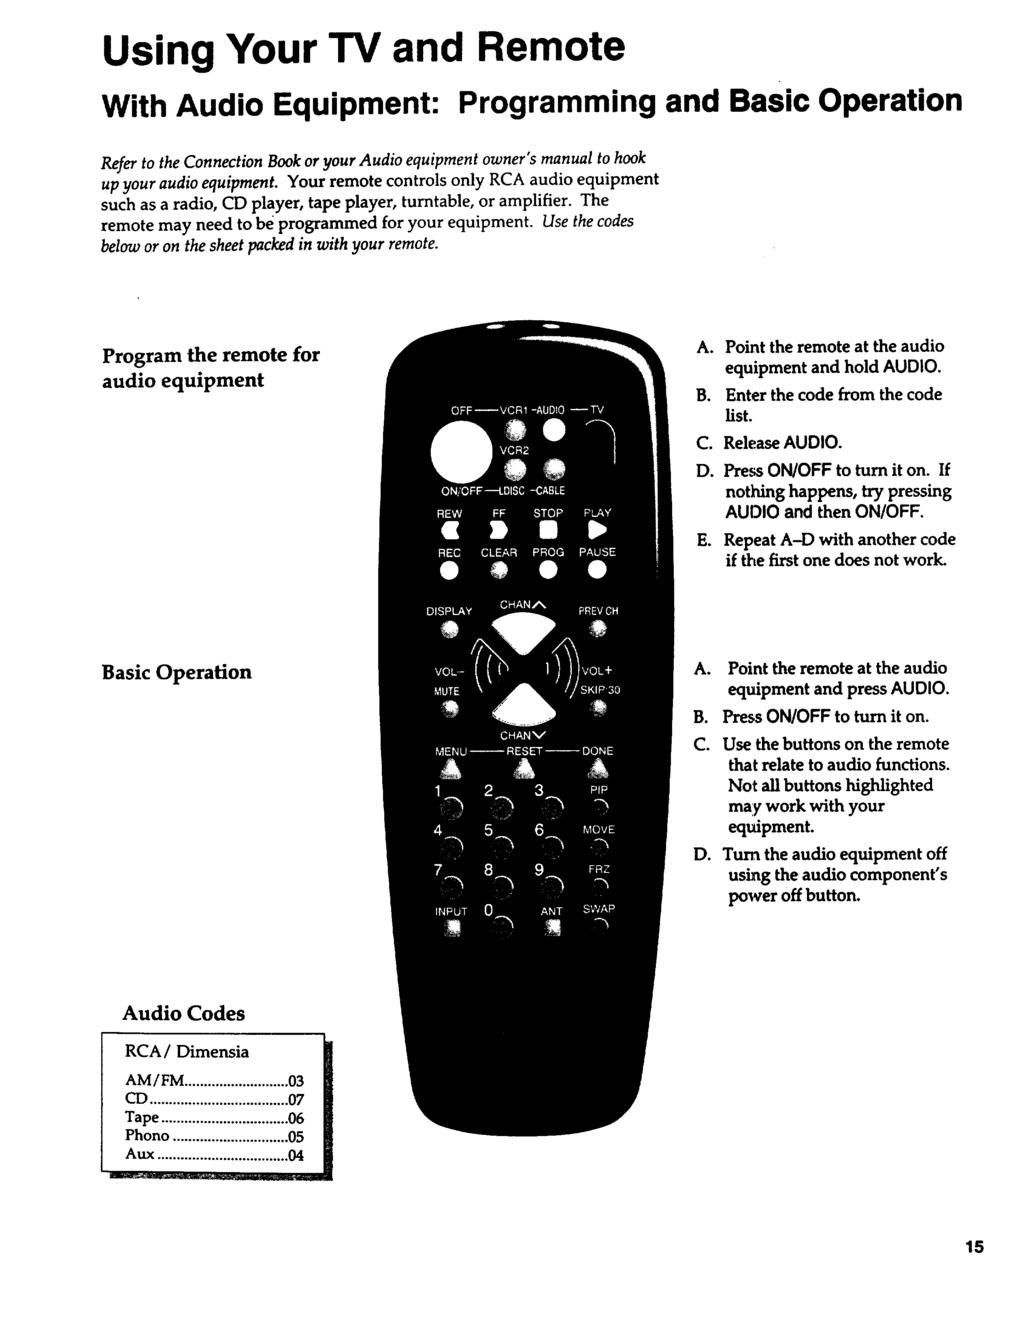 Using Your TV and Remote With Audio Equipment: Programming and Basic Operation Refer to the Connection Book or your Audio equipment owner's manual to hook up your audio equipment.